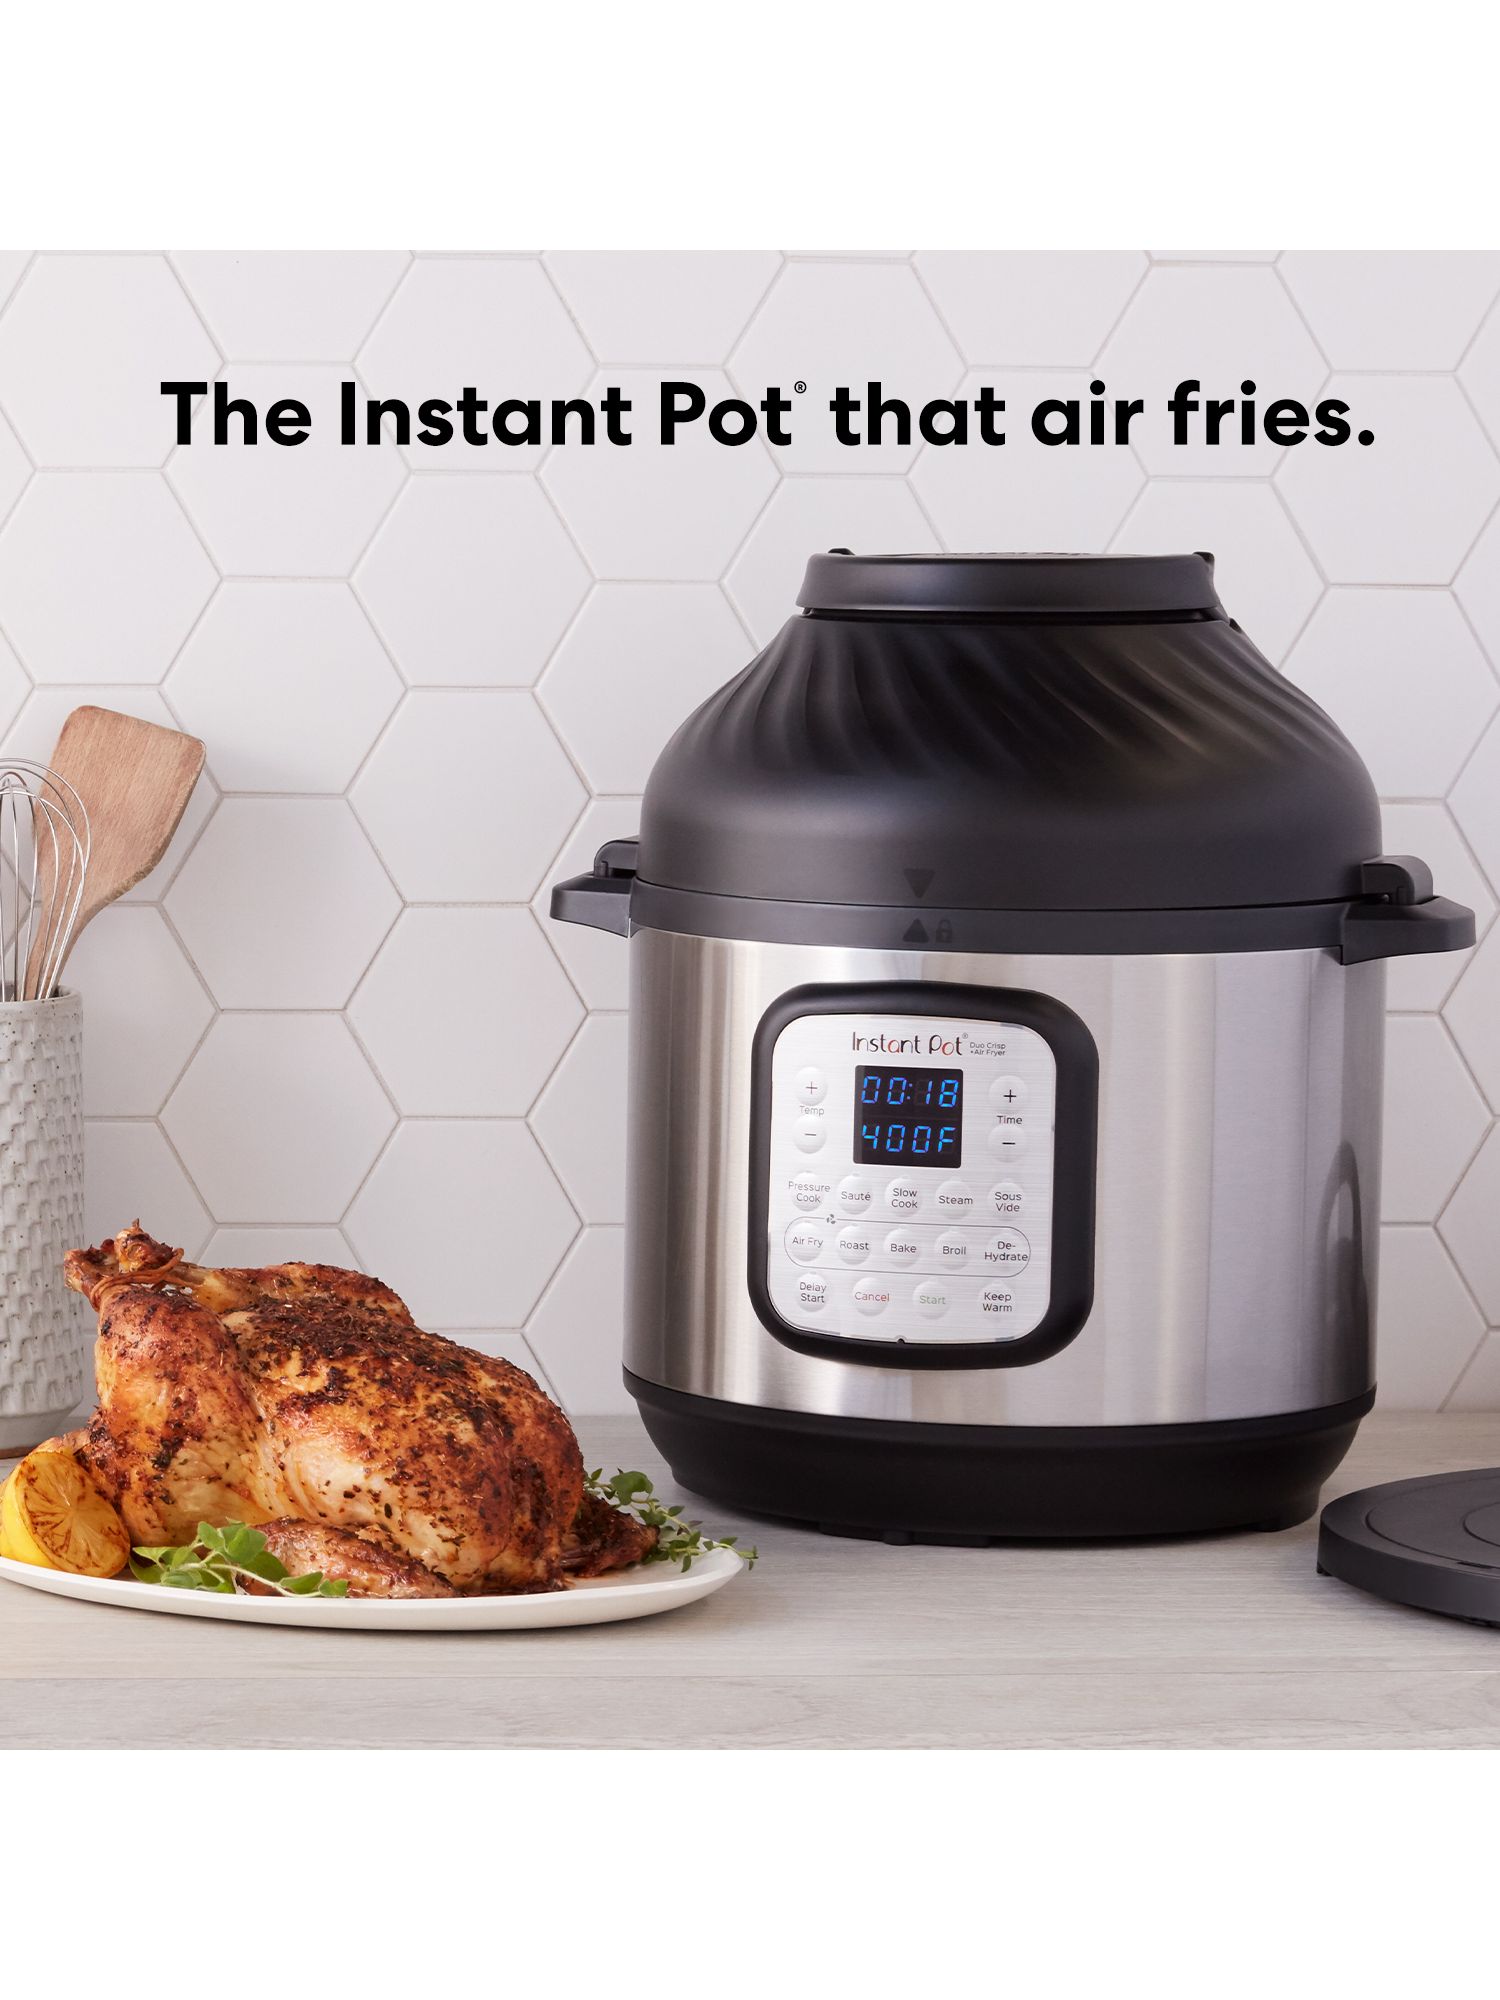 Instant Pot Duo Crisp Pressure Cooker 11 in 1, 8 Qt with Air Fryer, Roast,  Bake, Dehydrate and more & Genuine Instant Pot Tempered Glass lid, Clear 10